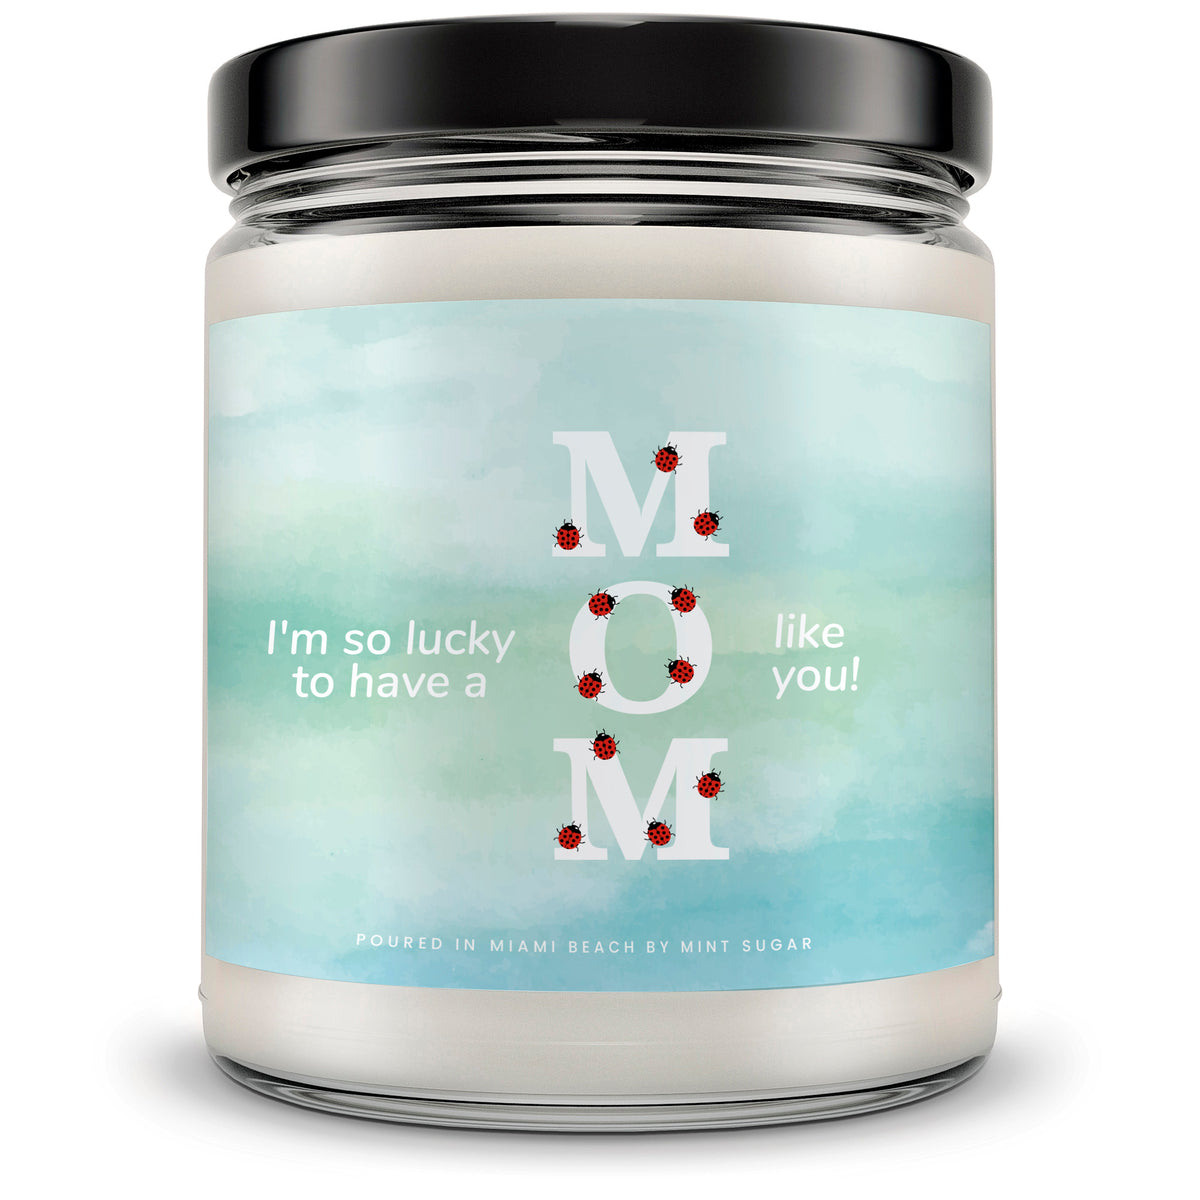 I'm so lucky to have a MOM like you! Candle - Mint Sugar Candle